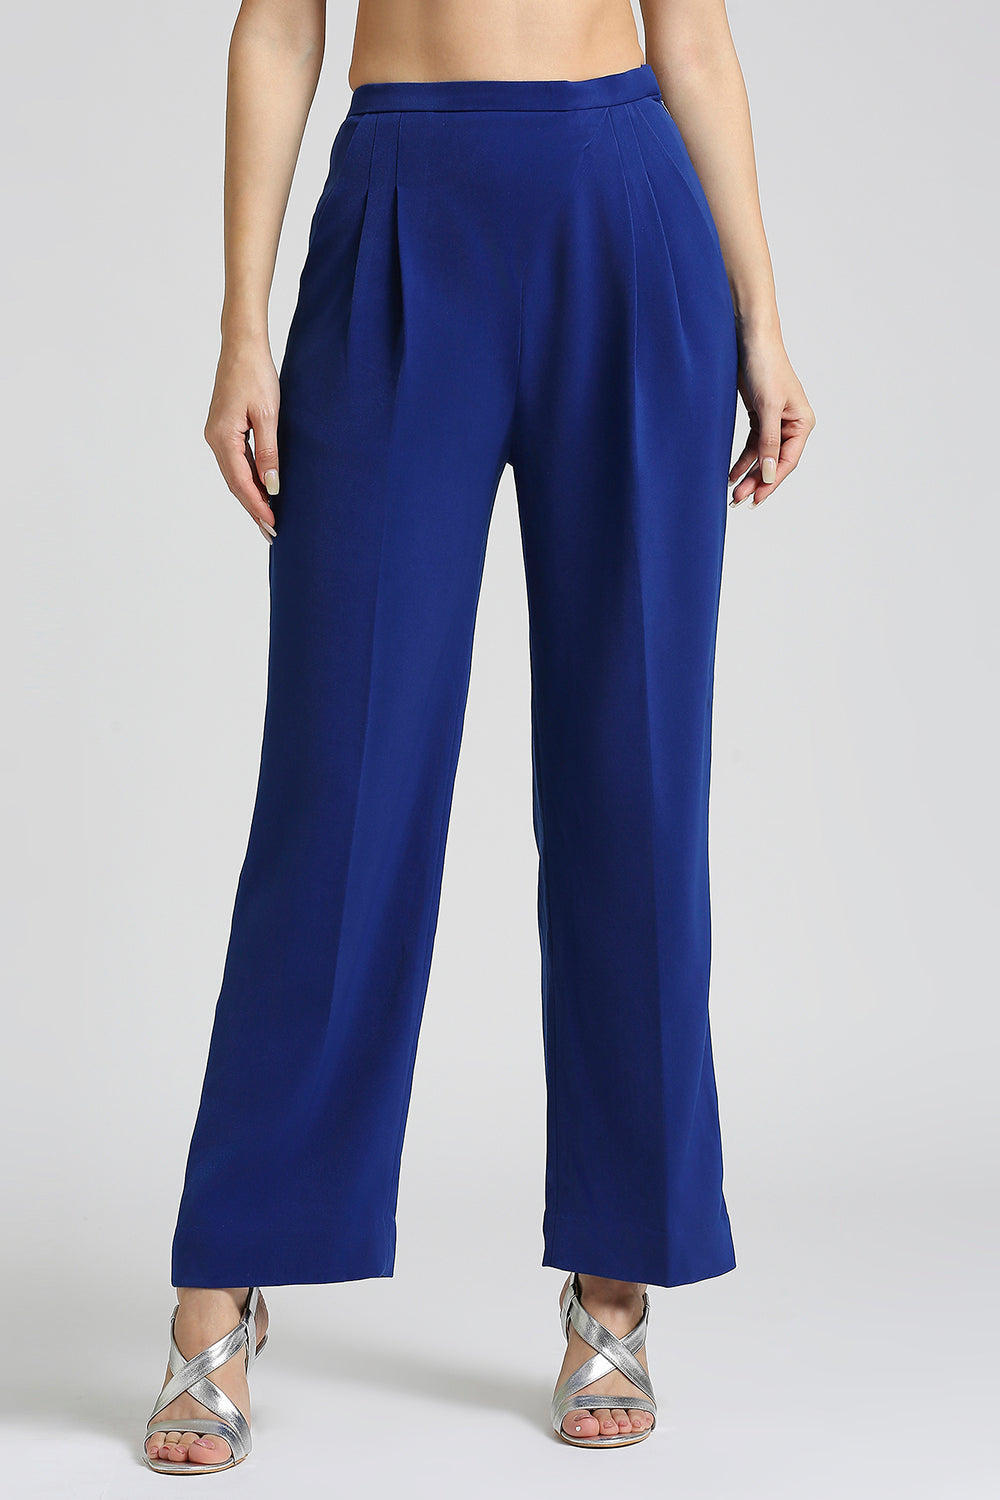 Yours Clothing Curve Cobalt Blue Tapered Trousers Size 22 | eBay